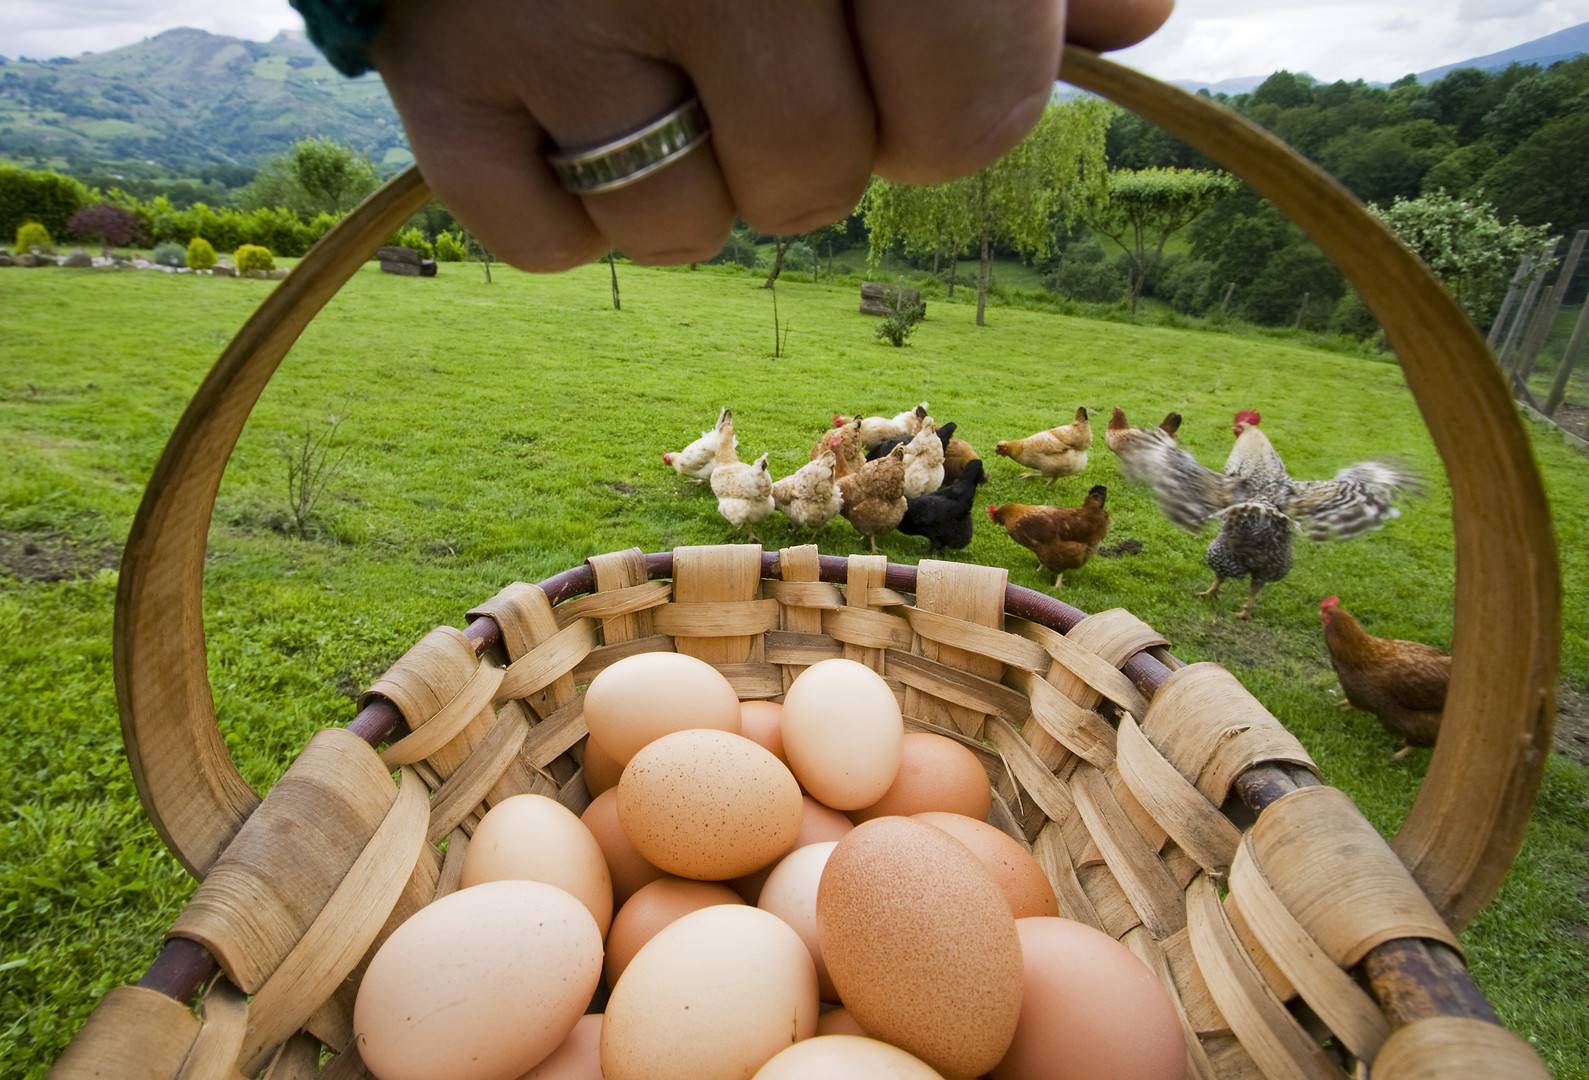 Basket with eggs and chickens